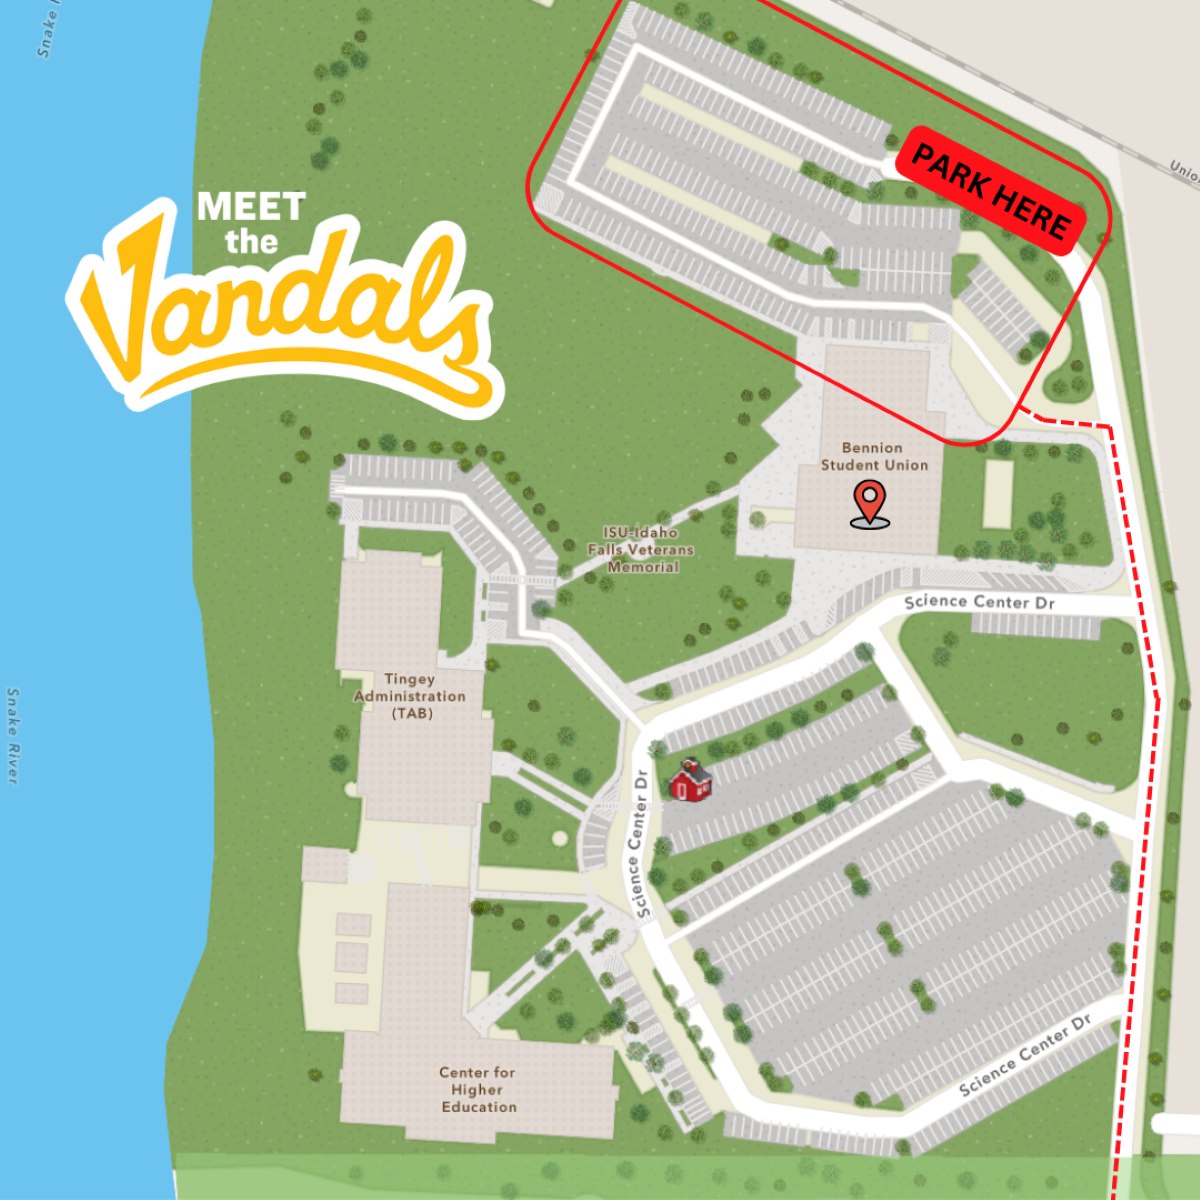 Map of the Idaho Falls center with the student union building marked for the Meet the Vandals event